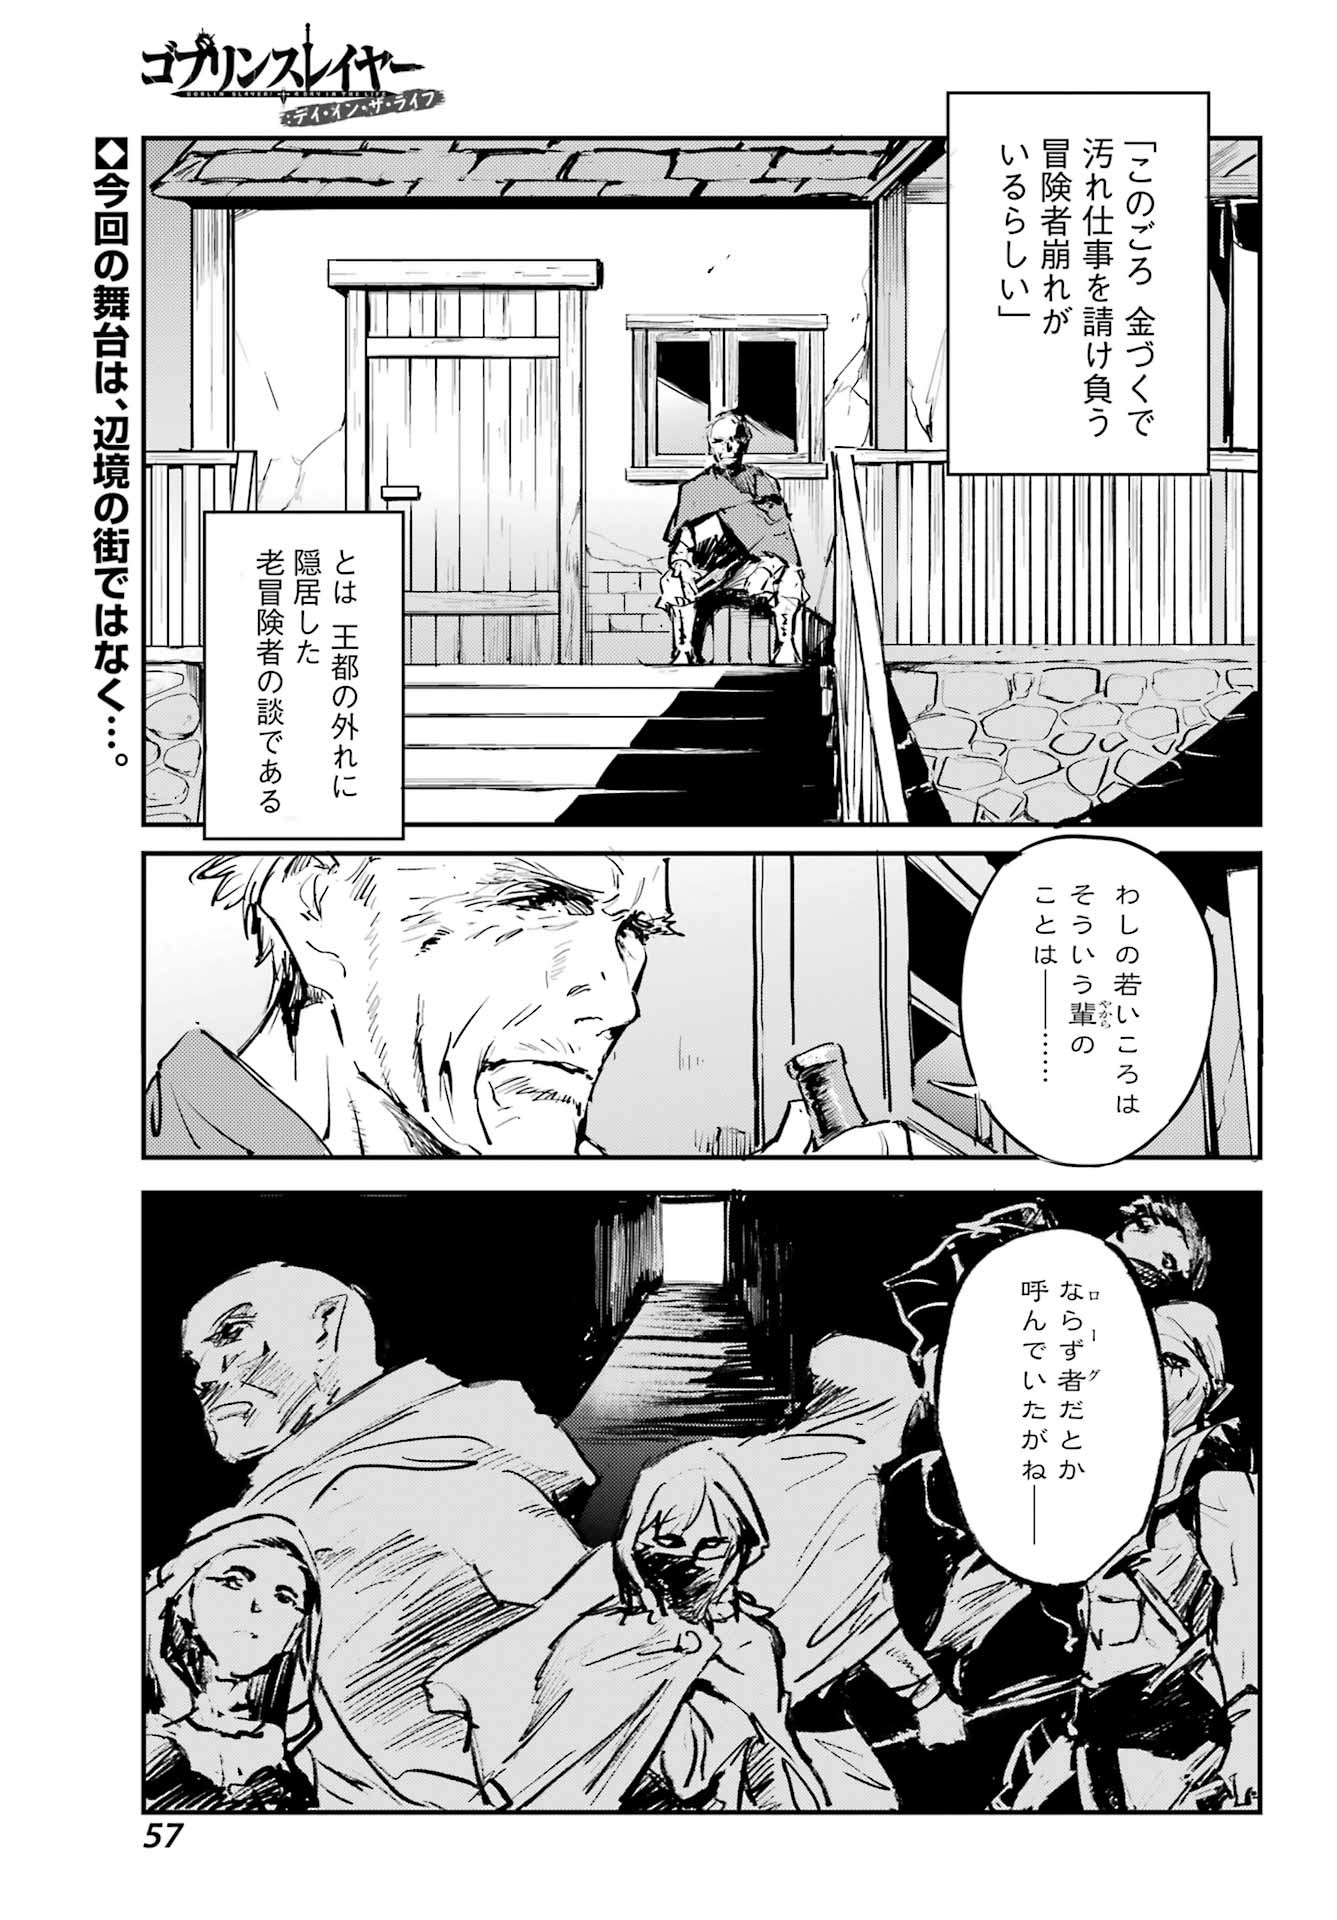 Goblin Slayer: Day in the Life - Chapter 07 - Page 1